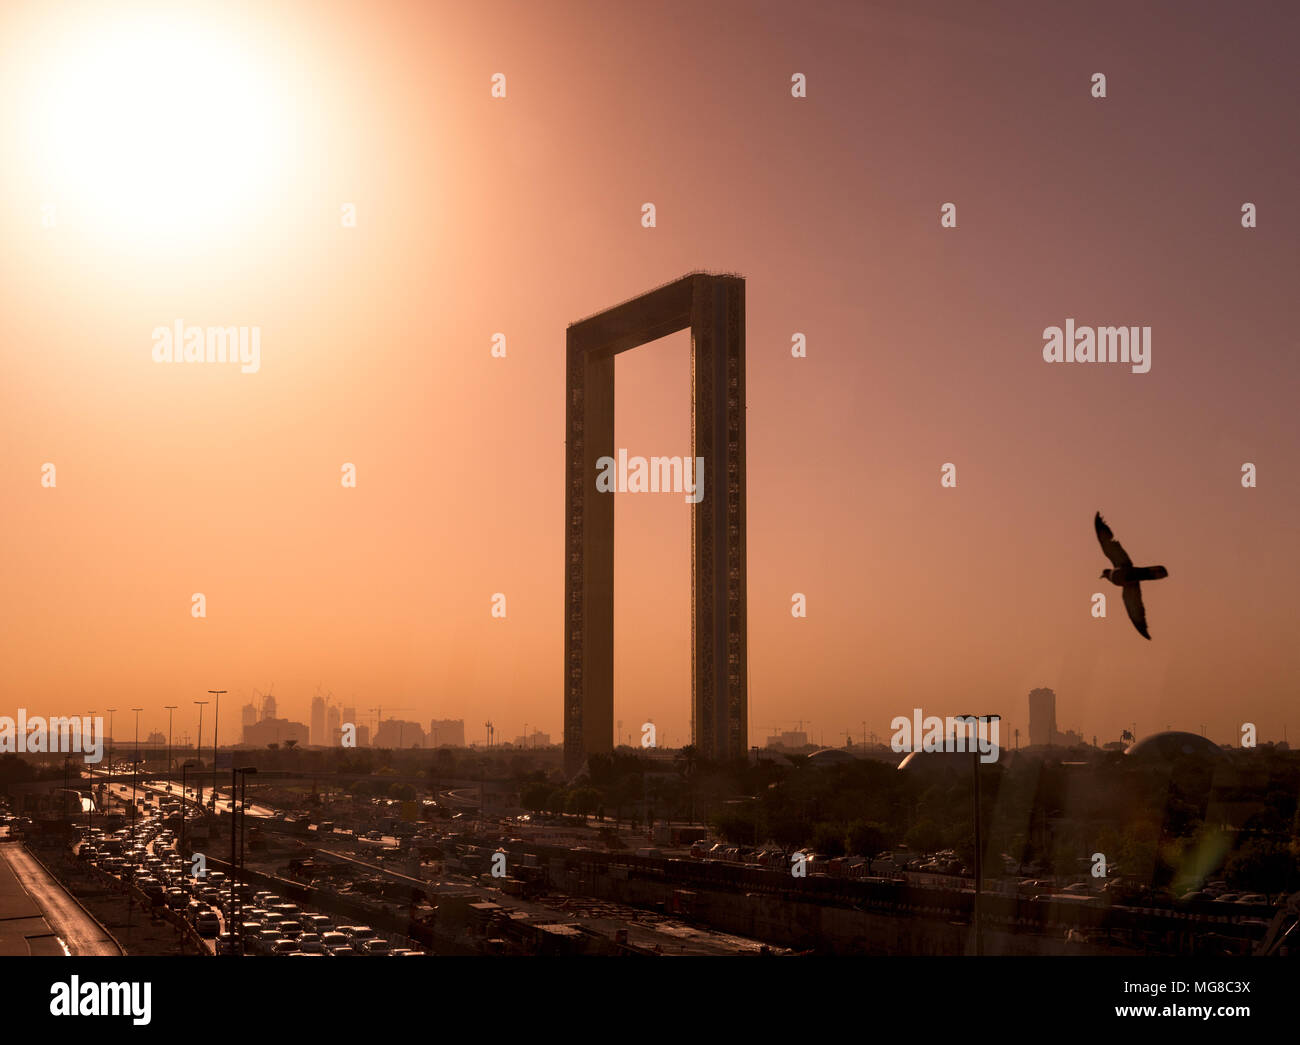 A beautiful Skyline and busy highway view of Dubai, UAE as seen from Dubai Frame at sunset Stock Photo